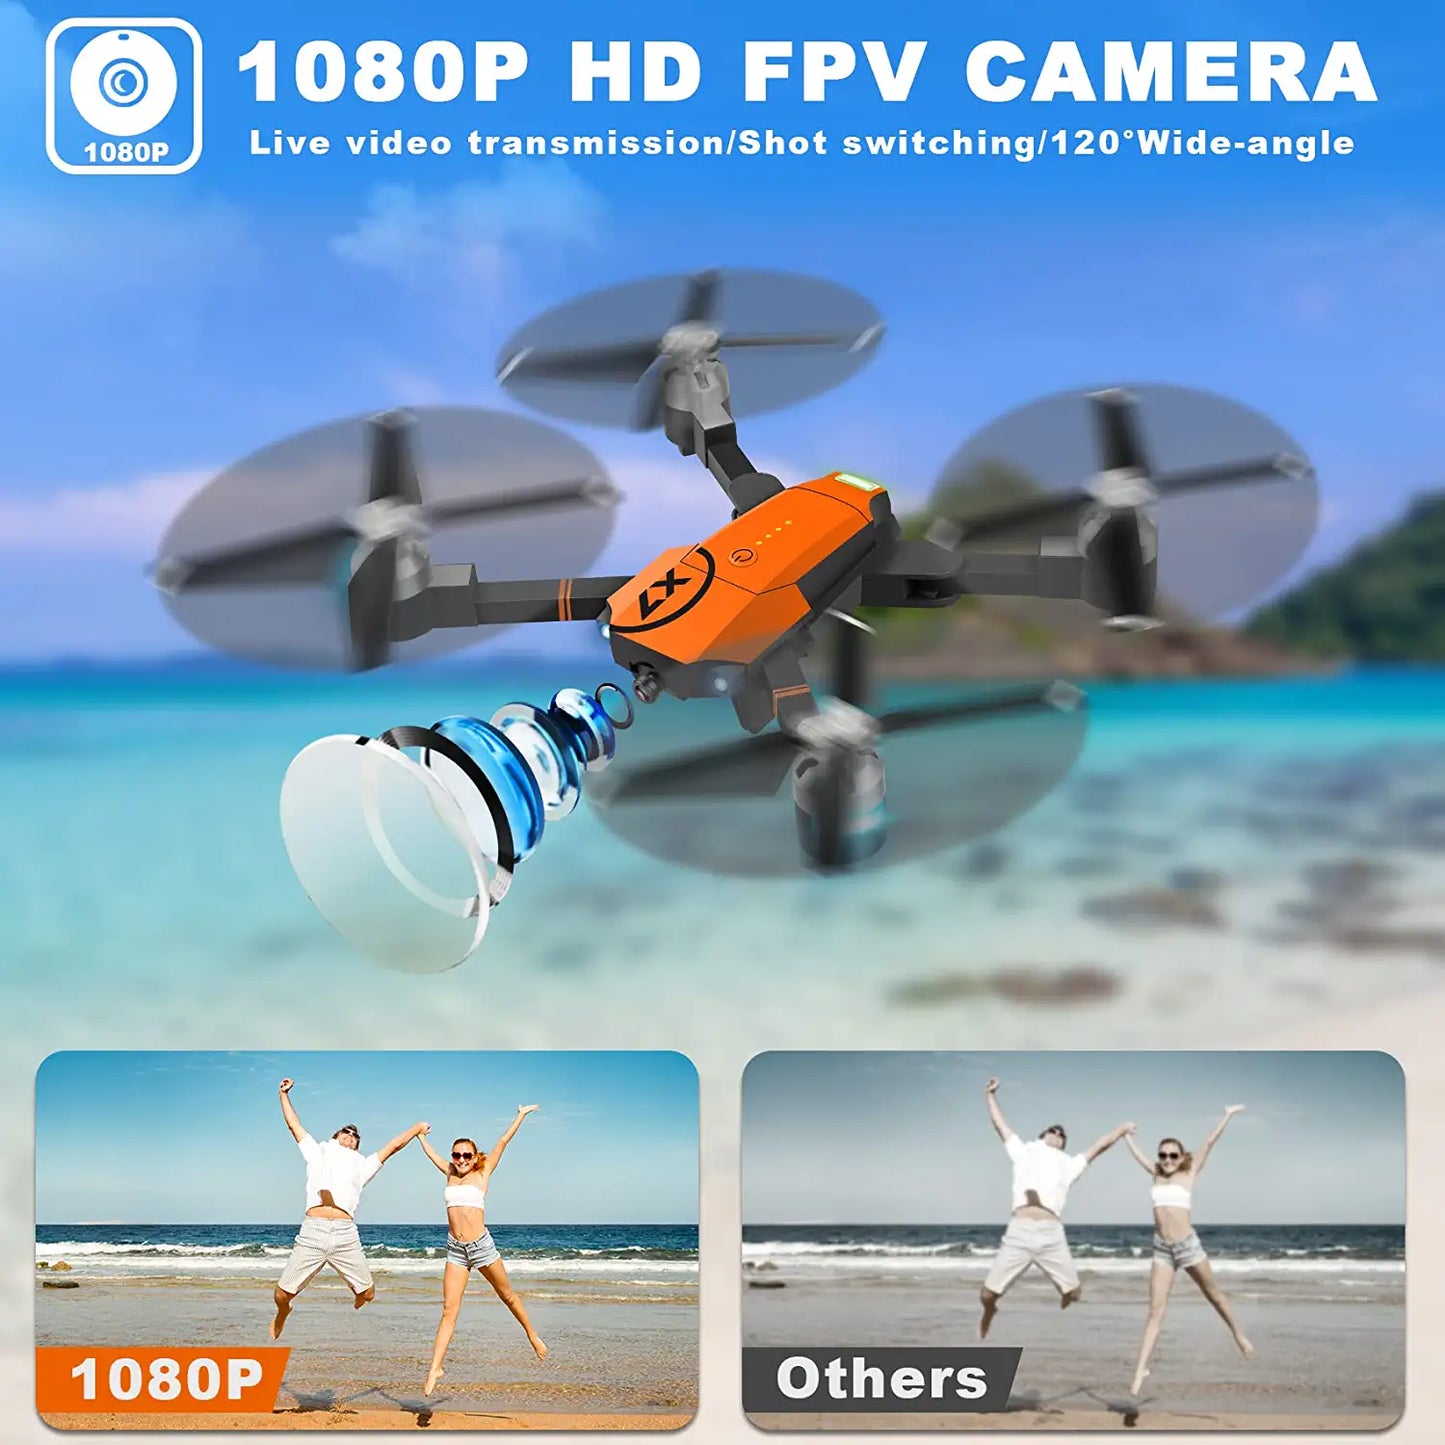 ORKNELY X-PACK7 Drone with Camera for Adults - WiFi 1080P HD Camera FPV RC Quadcopter Kids Toys Gifts for Beginner with Gravity Sensor - RCDrone